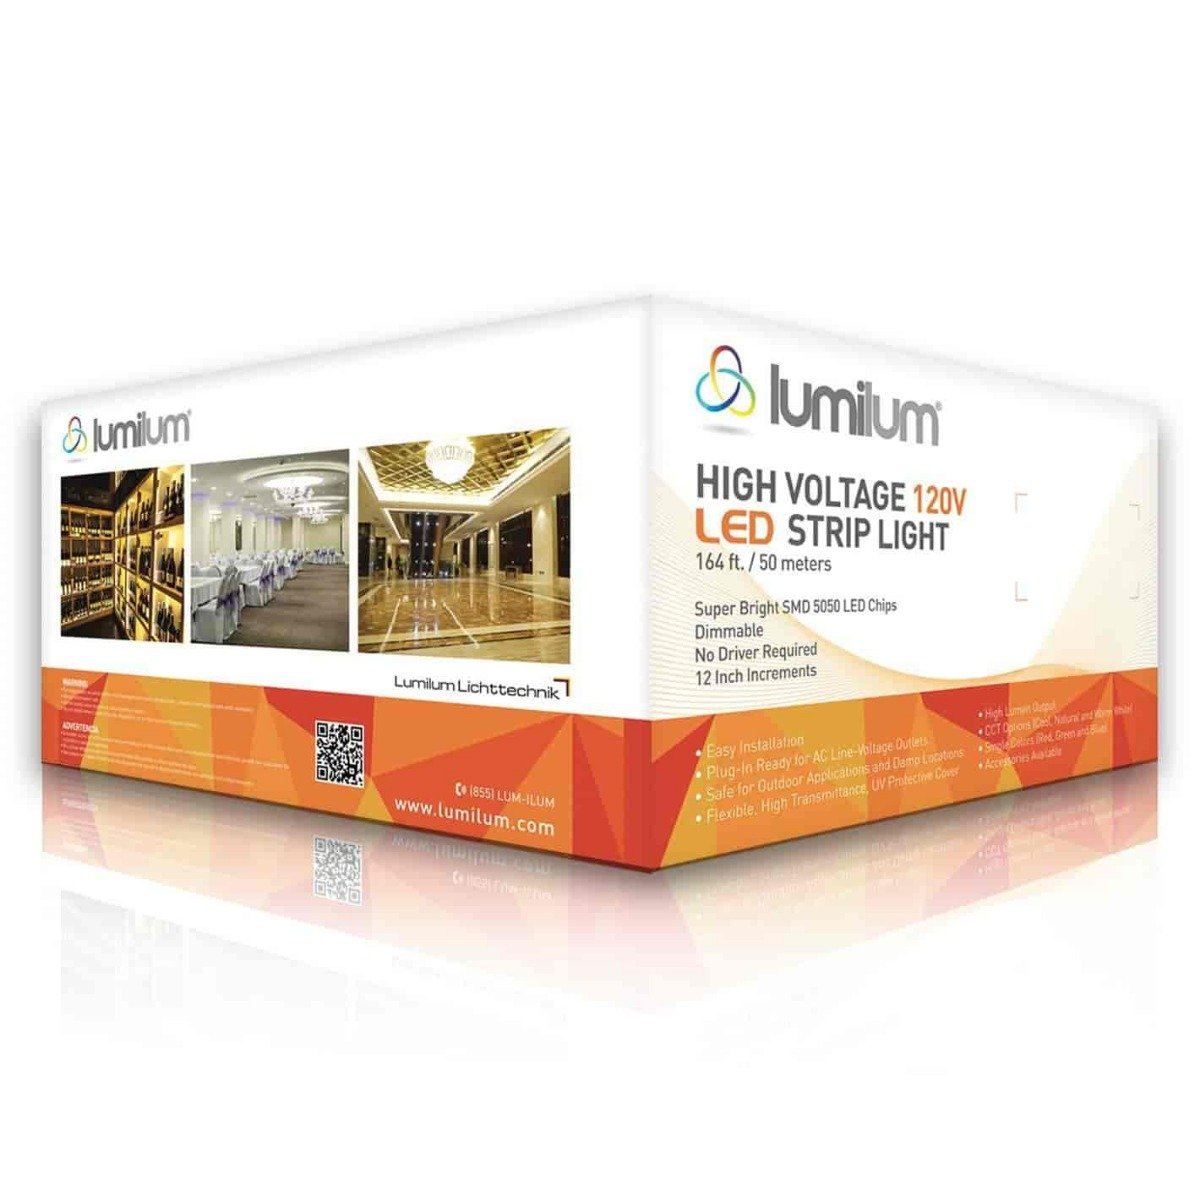 Load image into Gallery viewer, 120v led strip light box with orange bottom half and white top half with multiple photos and a qr code
